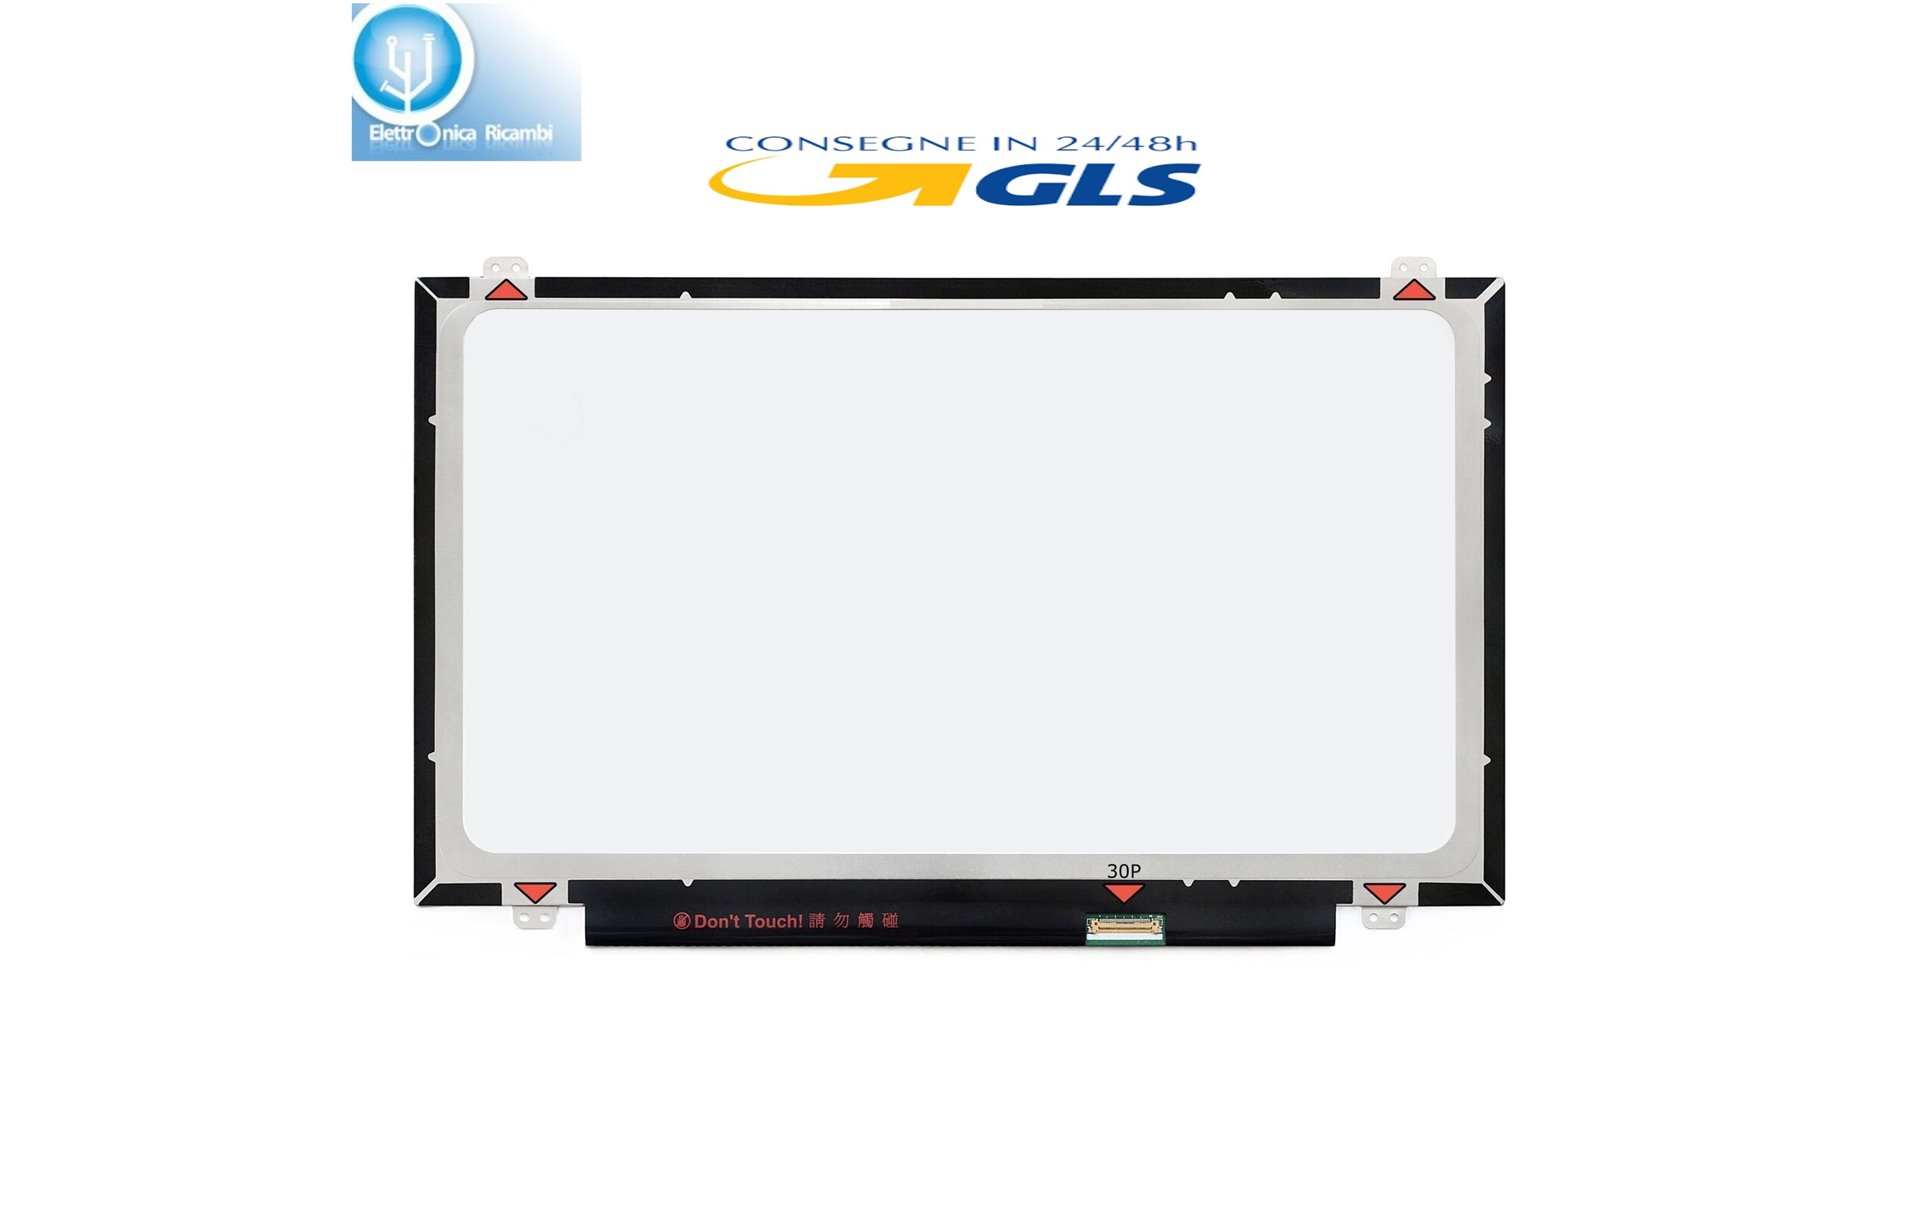 Display LCD Schermo Acer ASPIRE V5-473P SERIES 14.0 LED 30 pin 1366x768